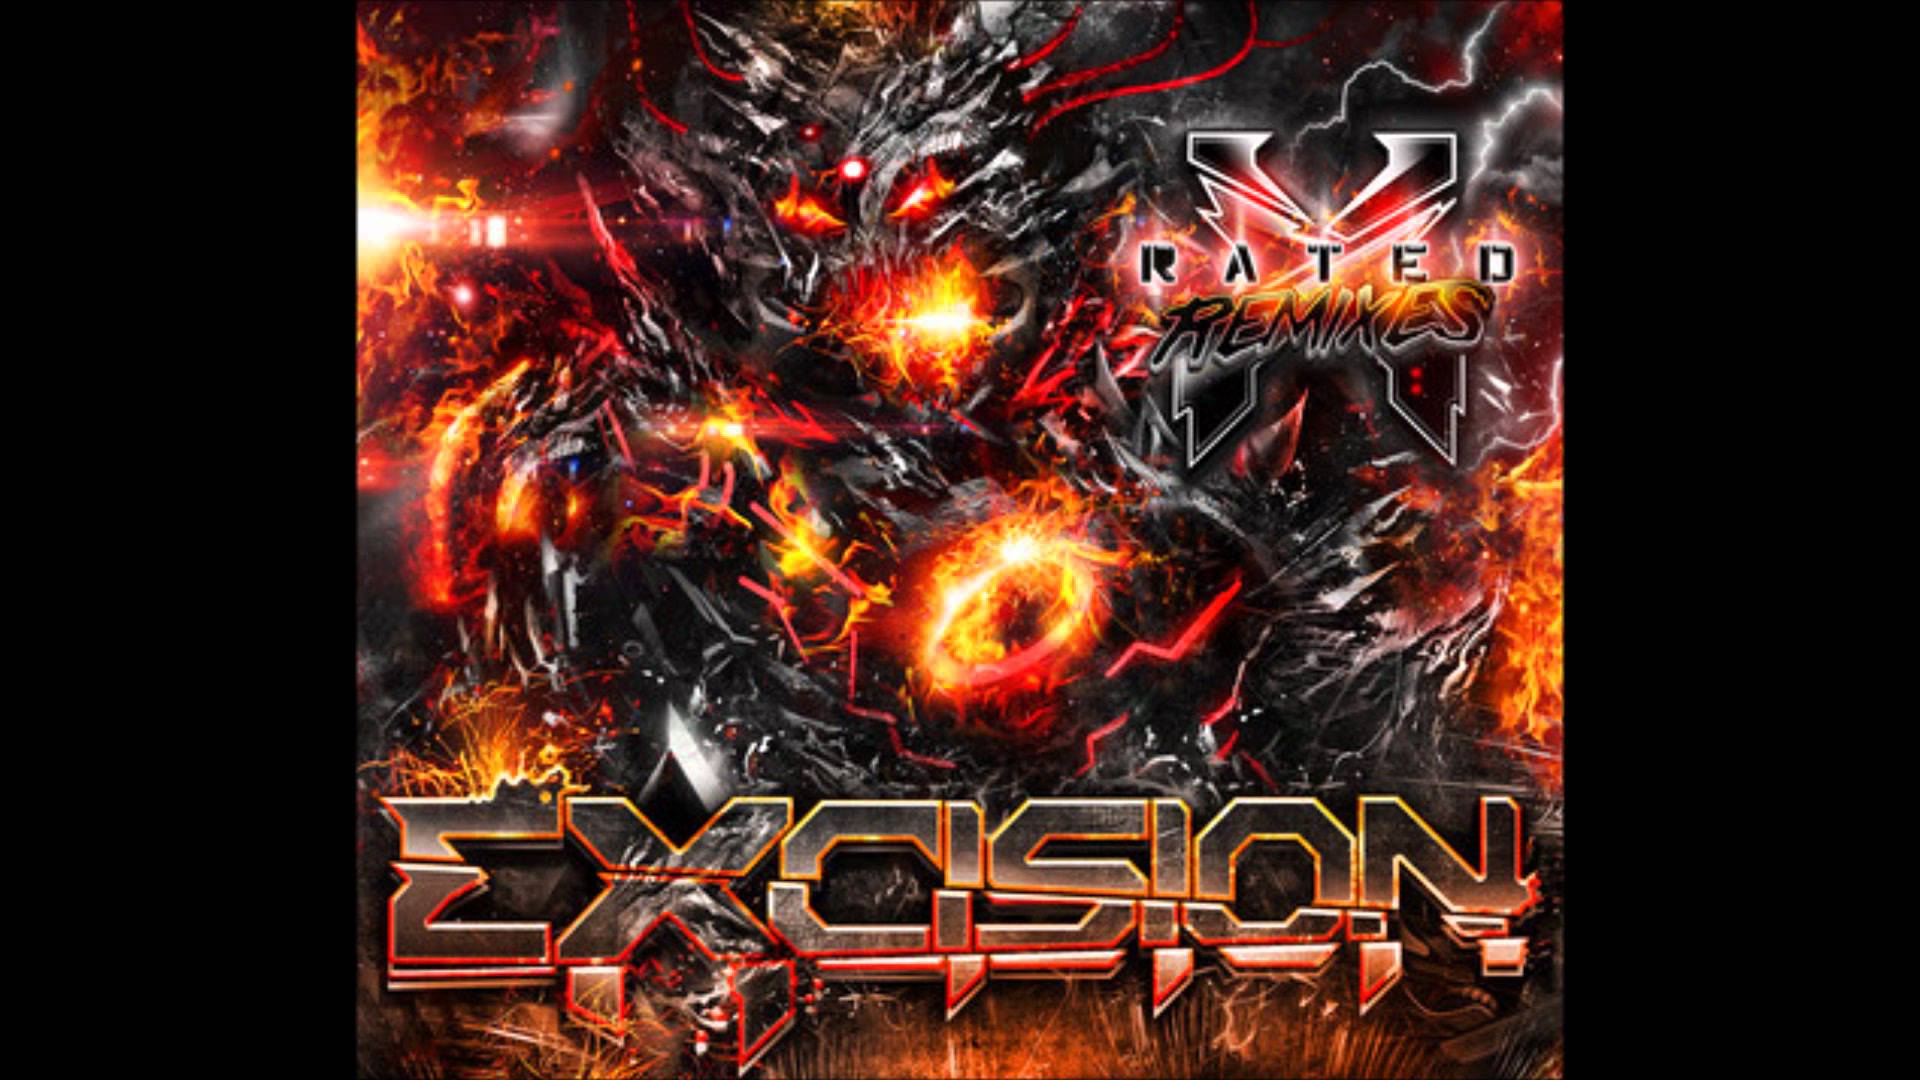 Excision Pics, Music Collection